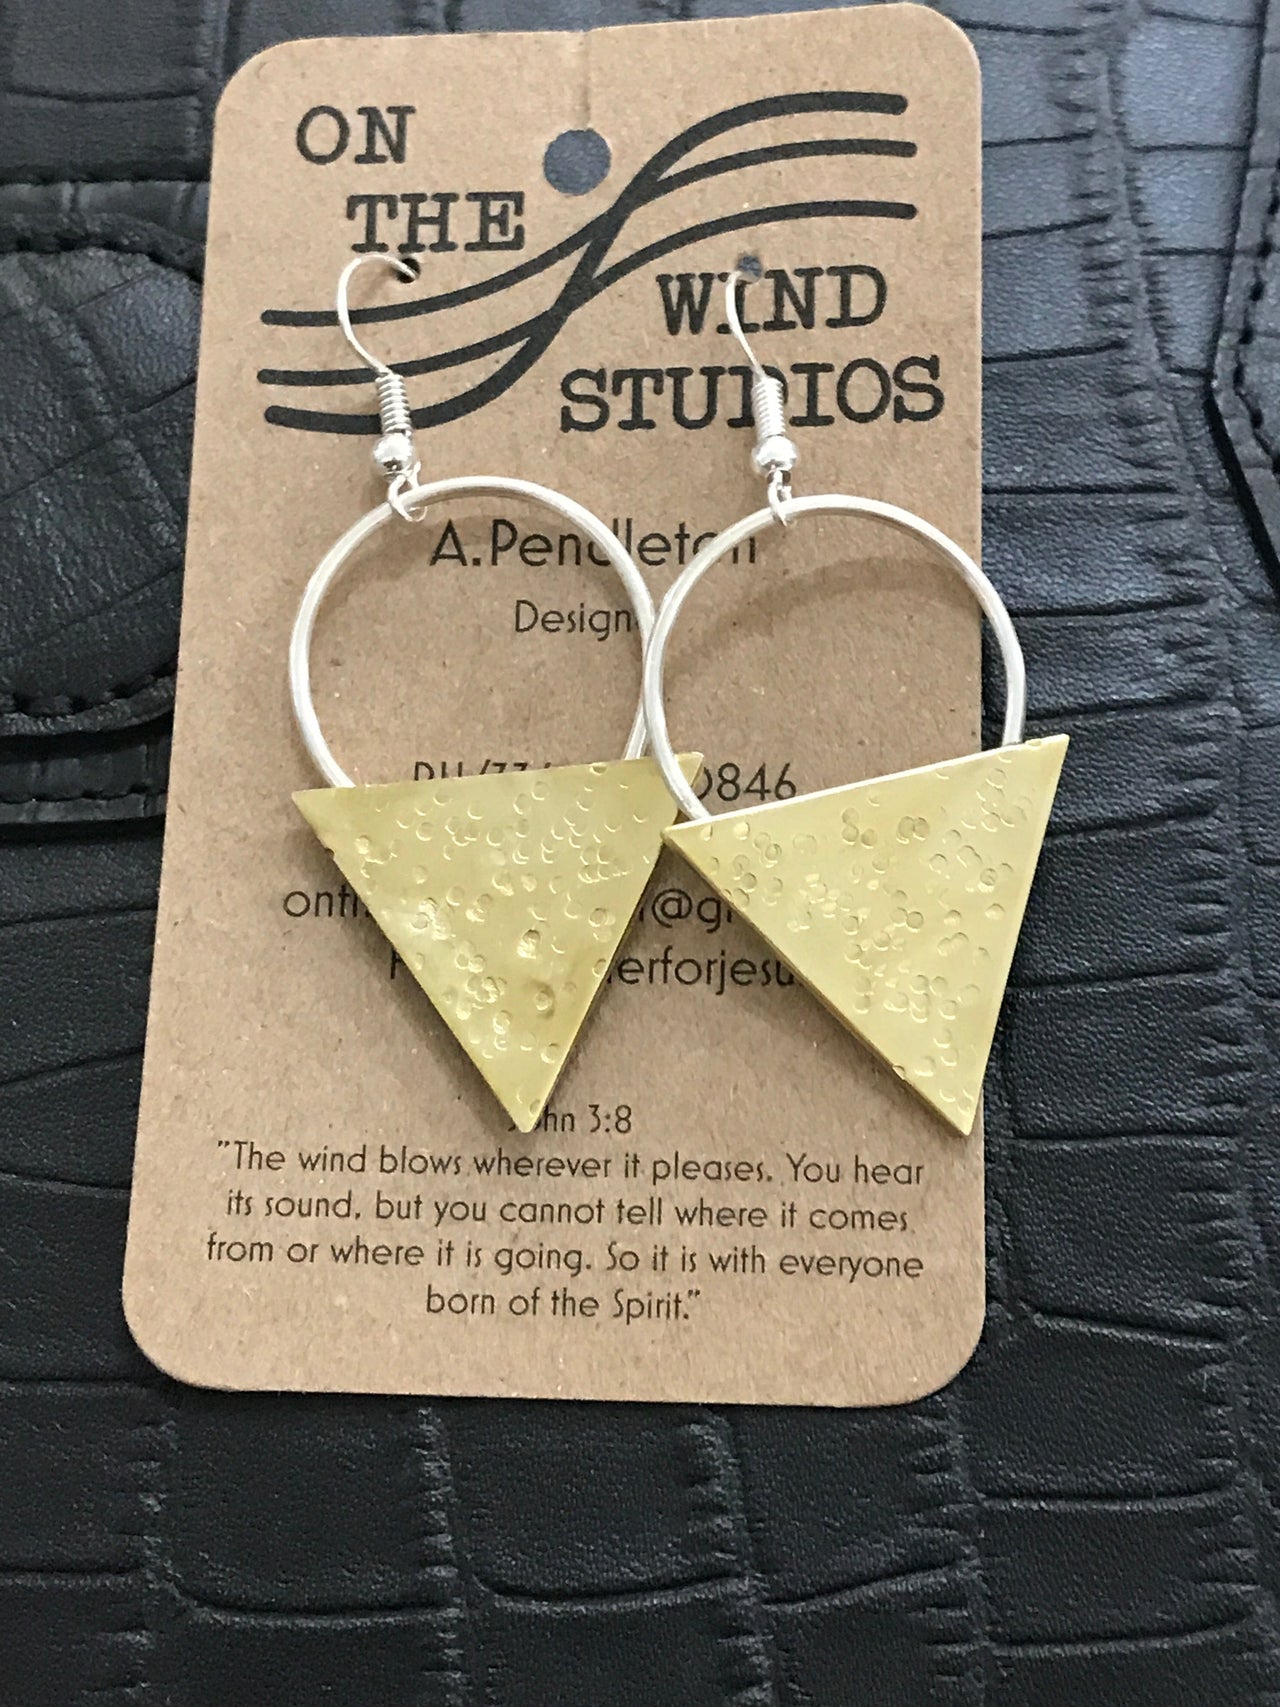 Hand Made Metal Earrings by OTWS On the Wind Studios Hand Made Evening Out